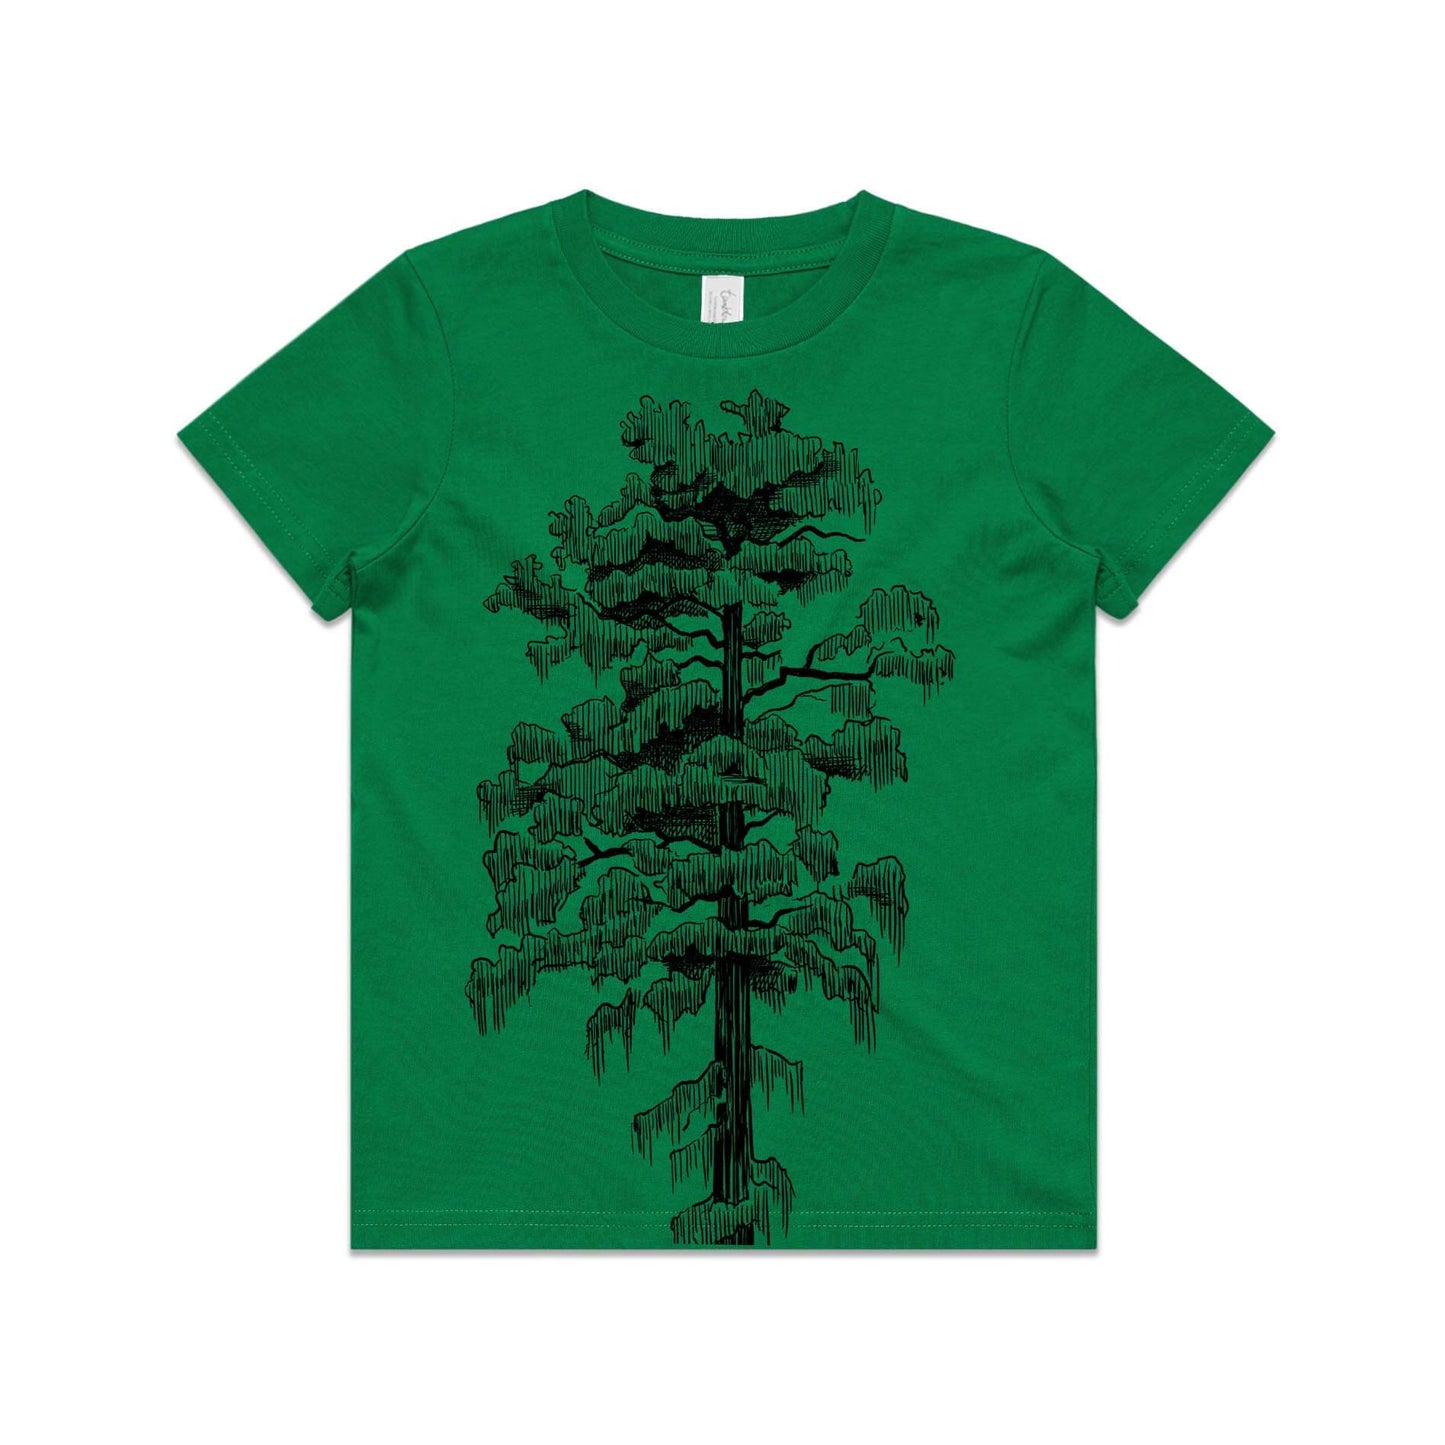 Green, cotton kids' t-shirt with screen printed rimu design.